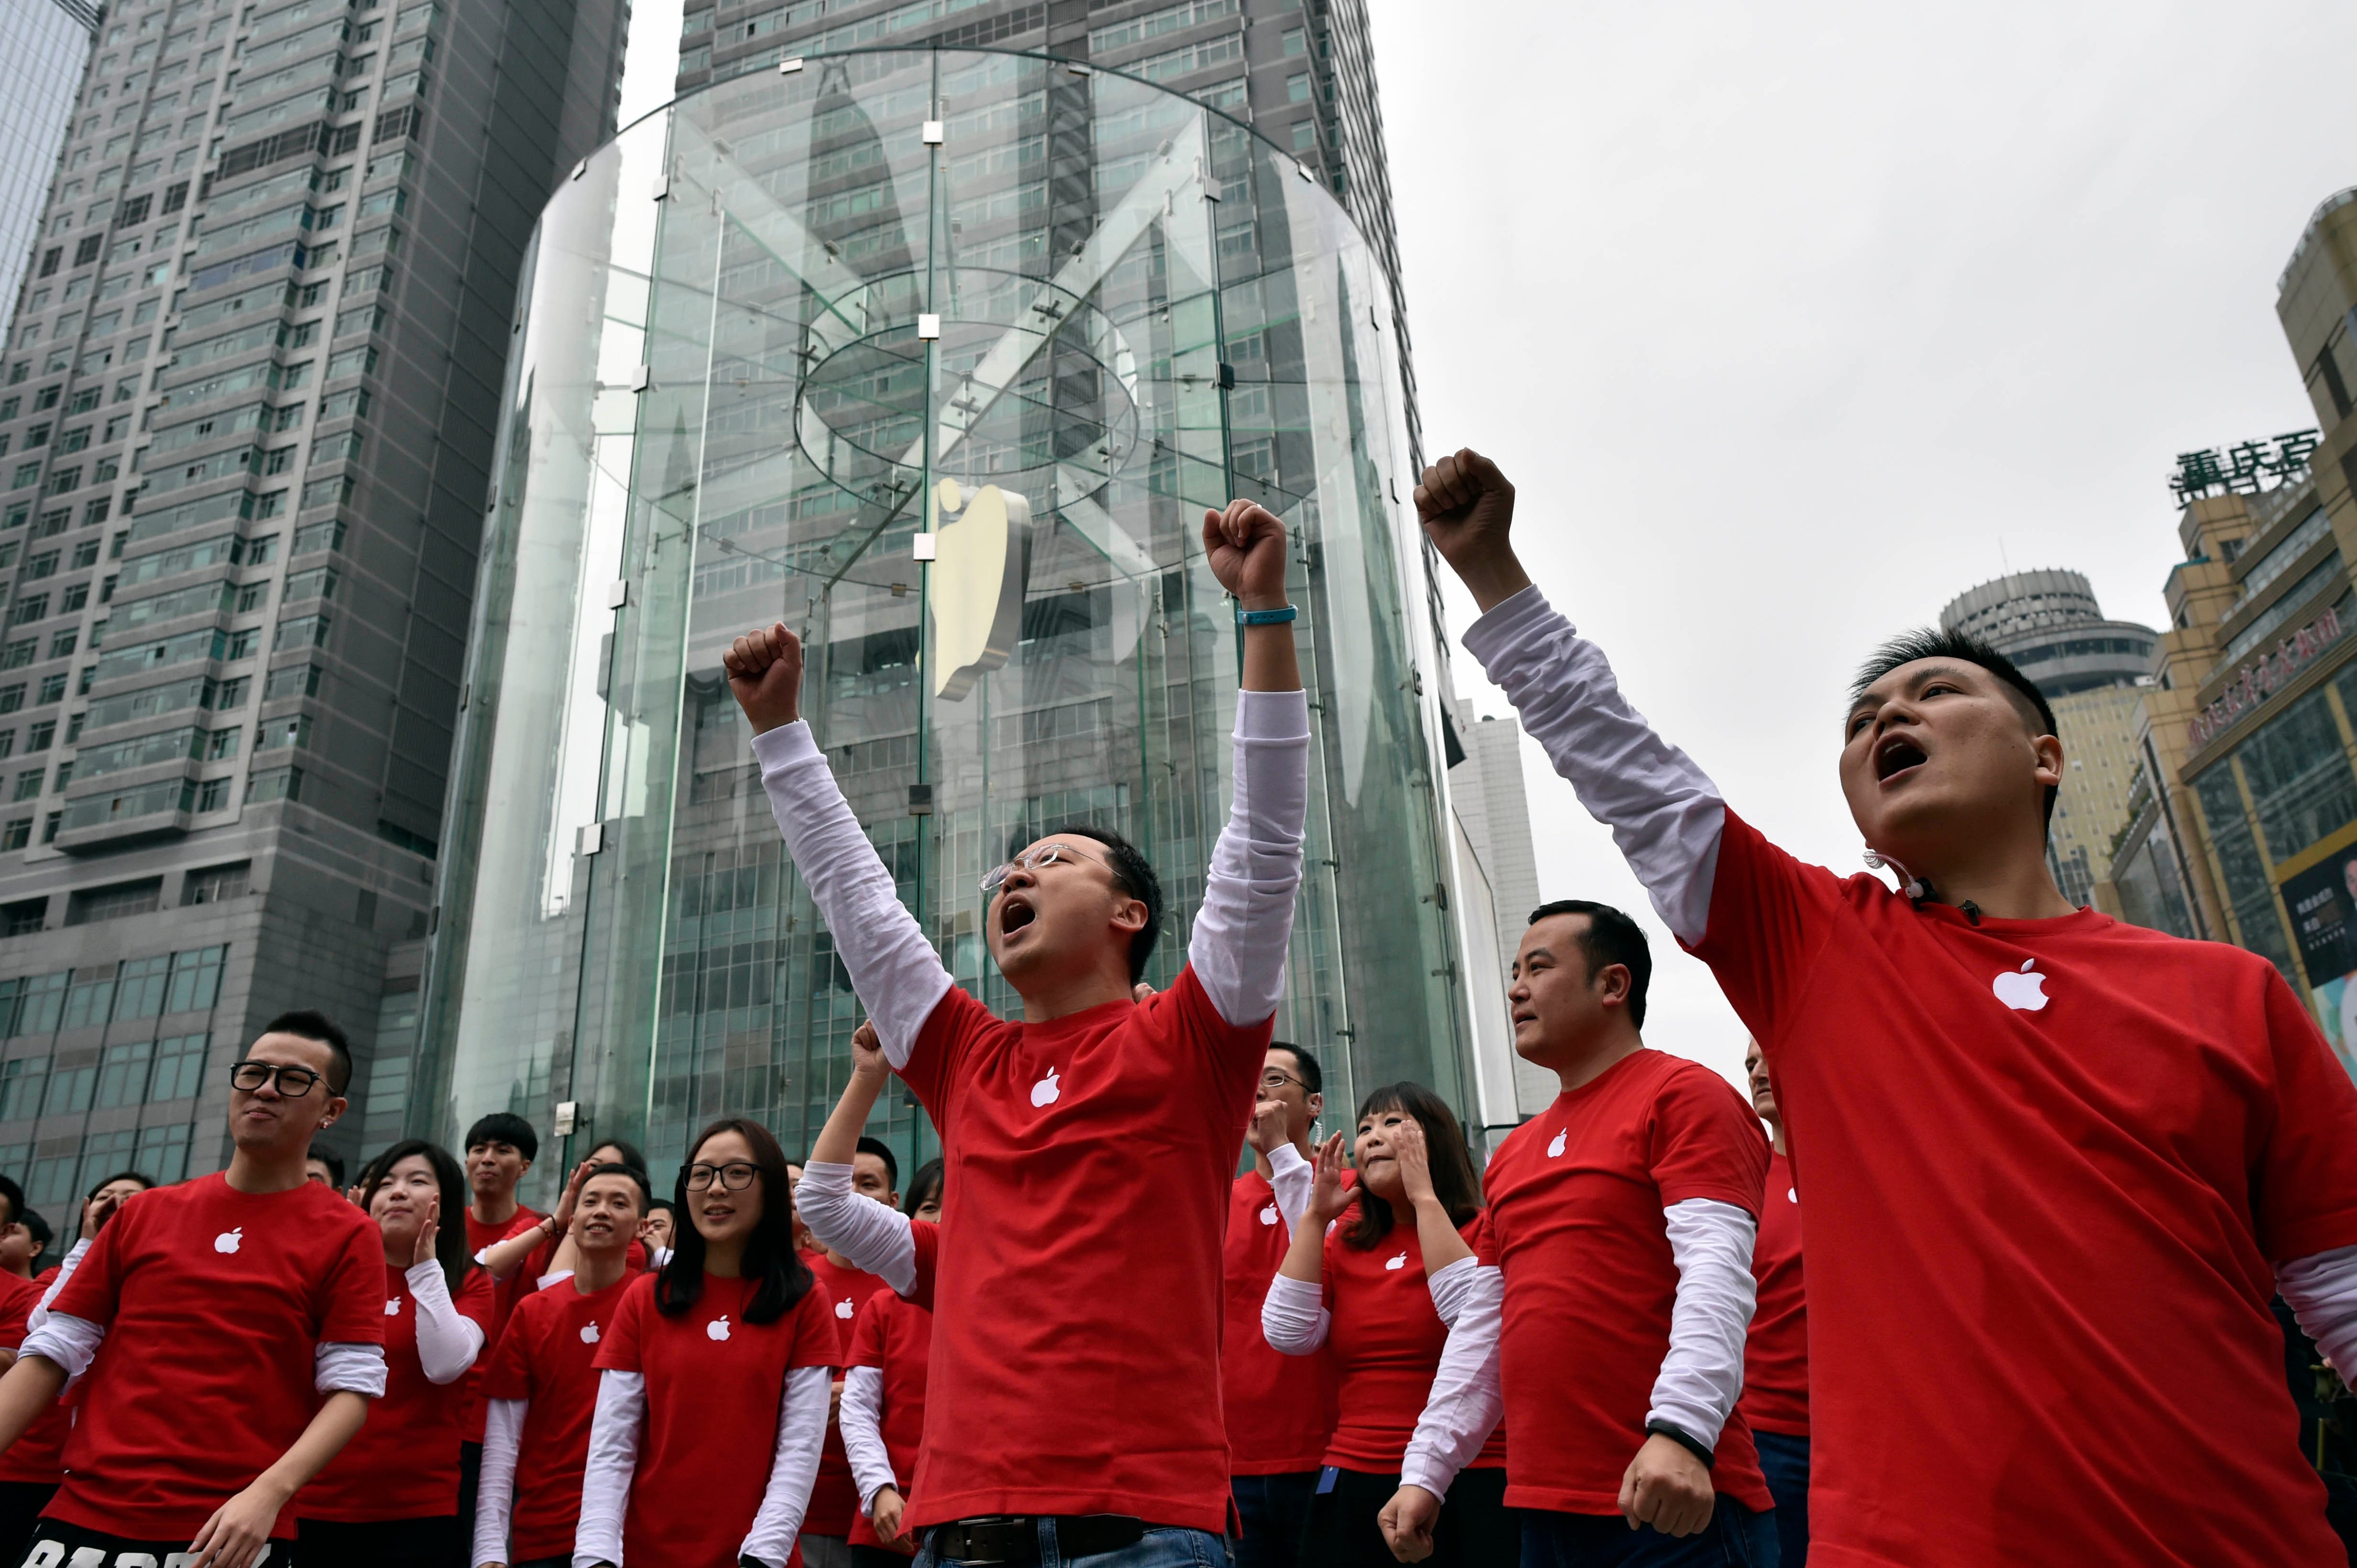 Apple Store employees cheer during the grand opening of an Apple Store in Jiefangbei, Yuzhong District on January 31, 2015 in Chongqing, Sichuan province of China. (VCG&mdash;VCG via Getty Images)